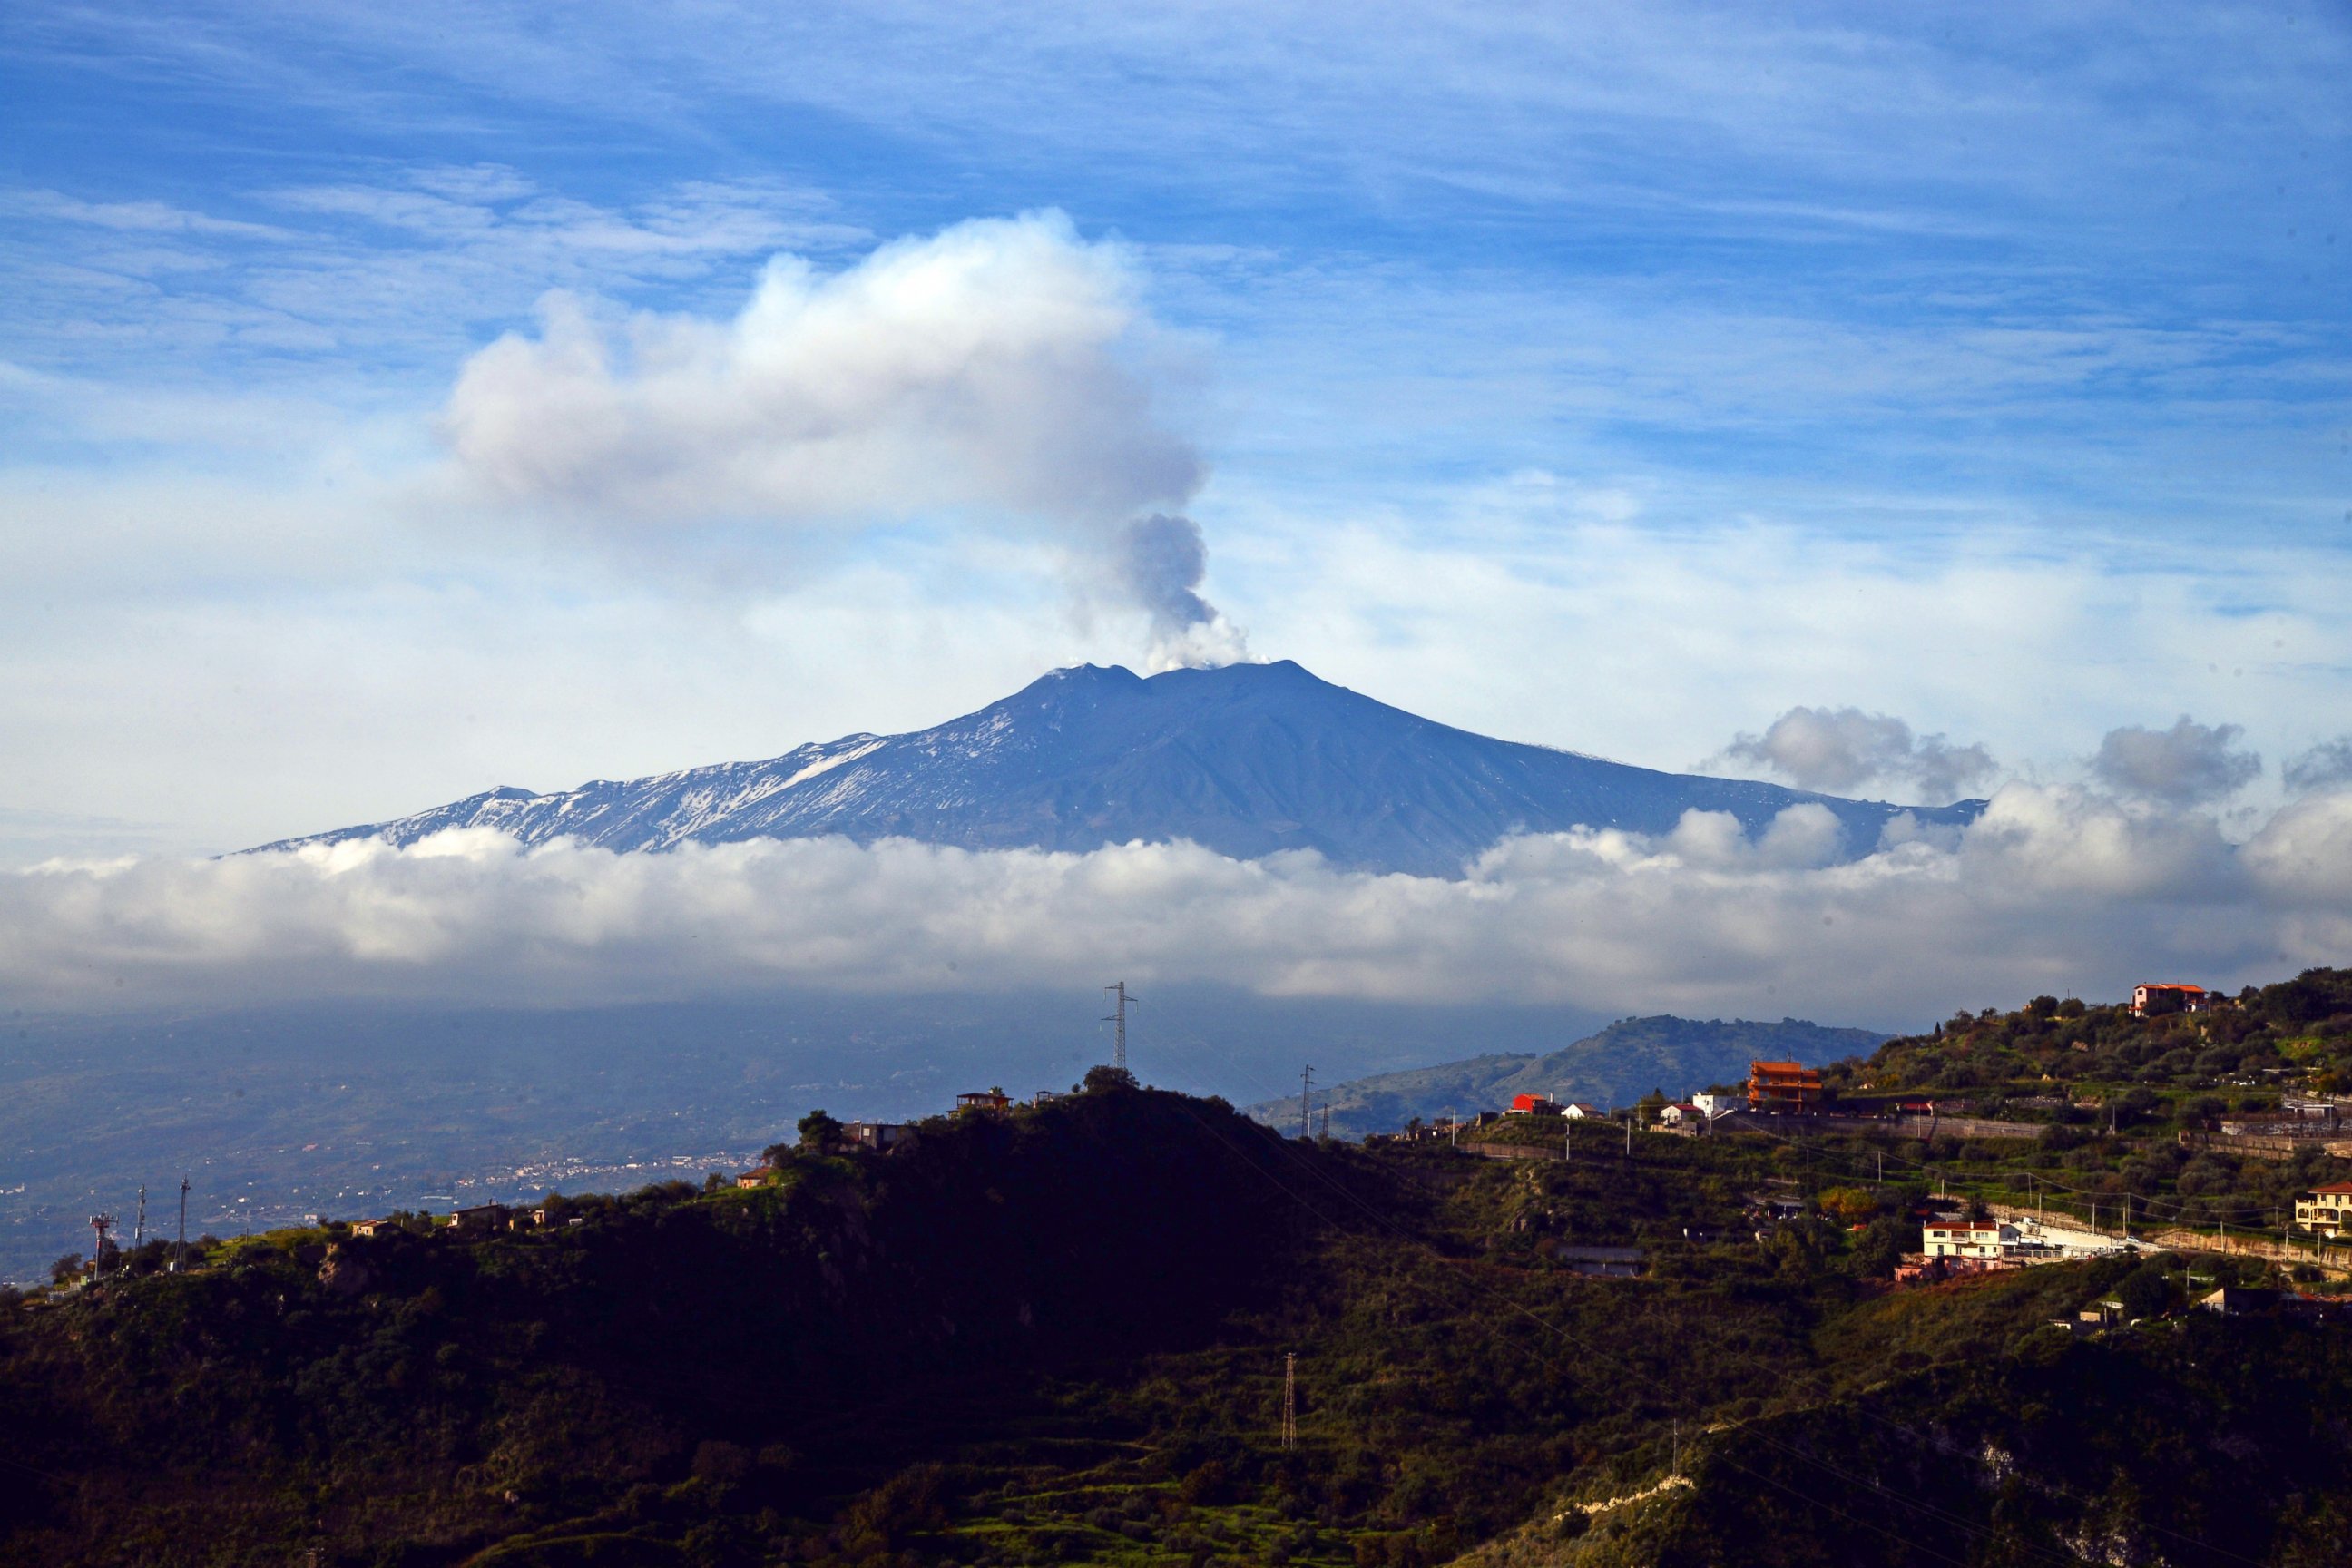 PHOTO: Smoke rises over the city of Taormina during an eruption of the Mount Etna, one of the most active volcanoes in the world, near Catania, on Dec. 4, 2015.